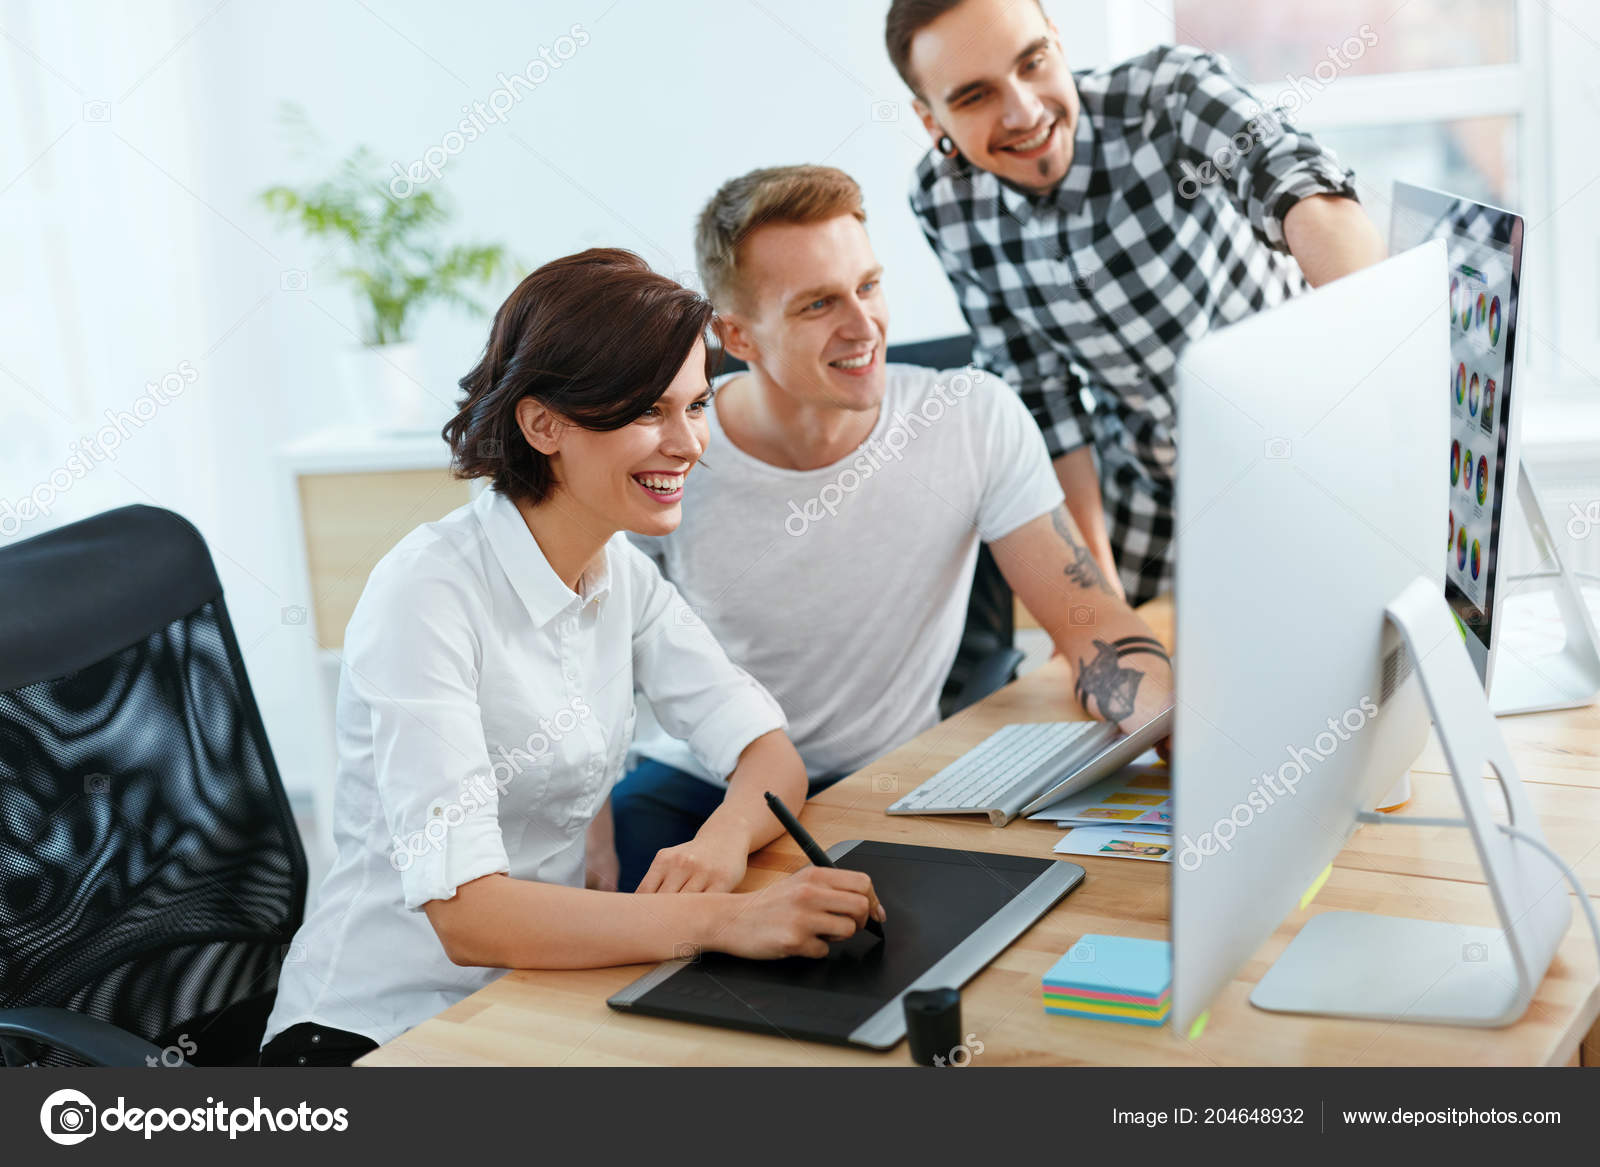 Team Of People Working On Computer In Office